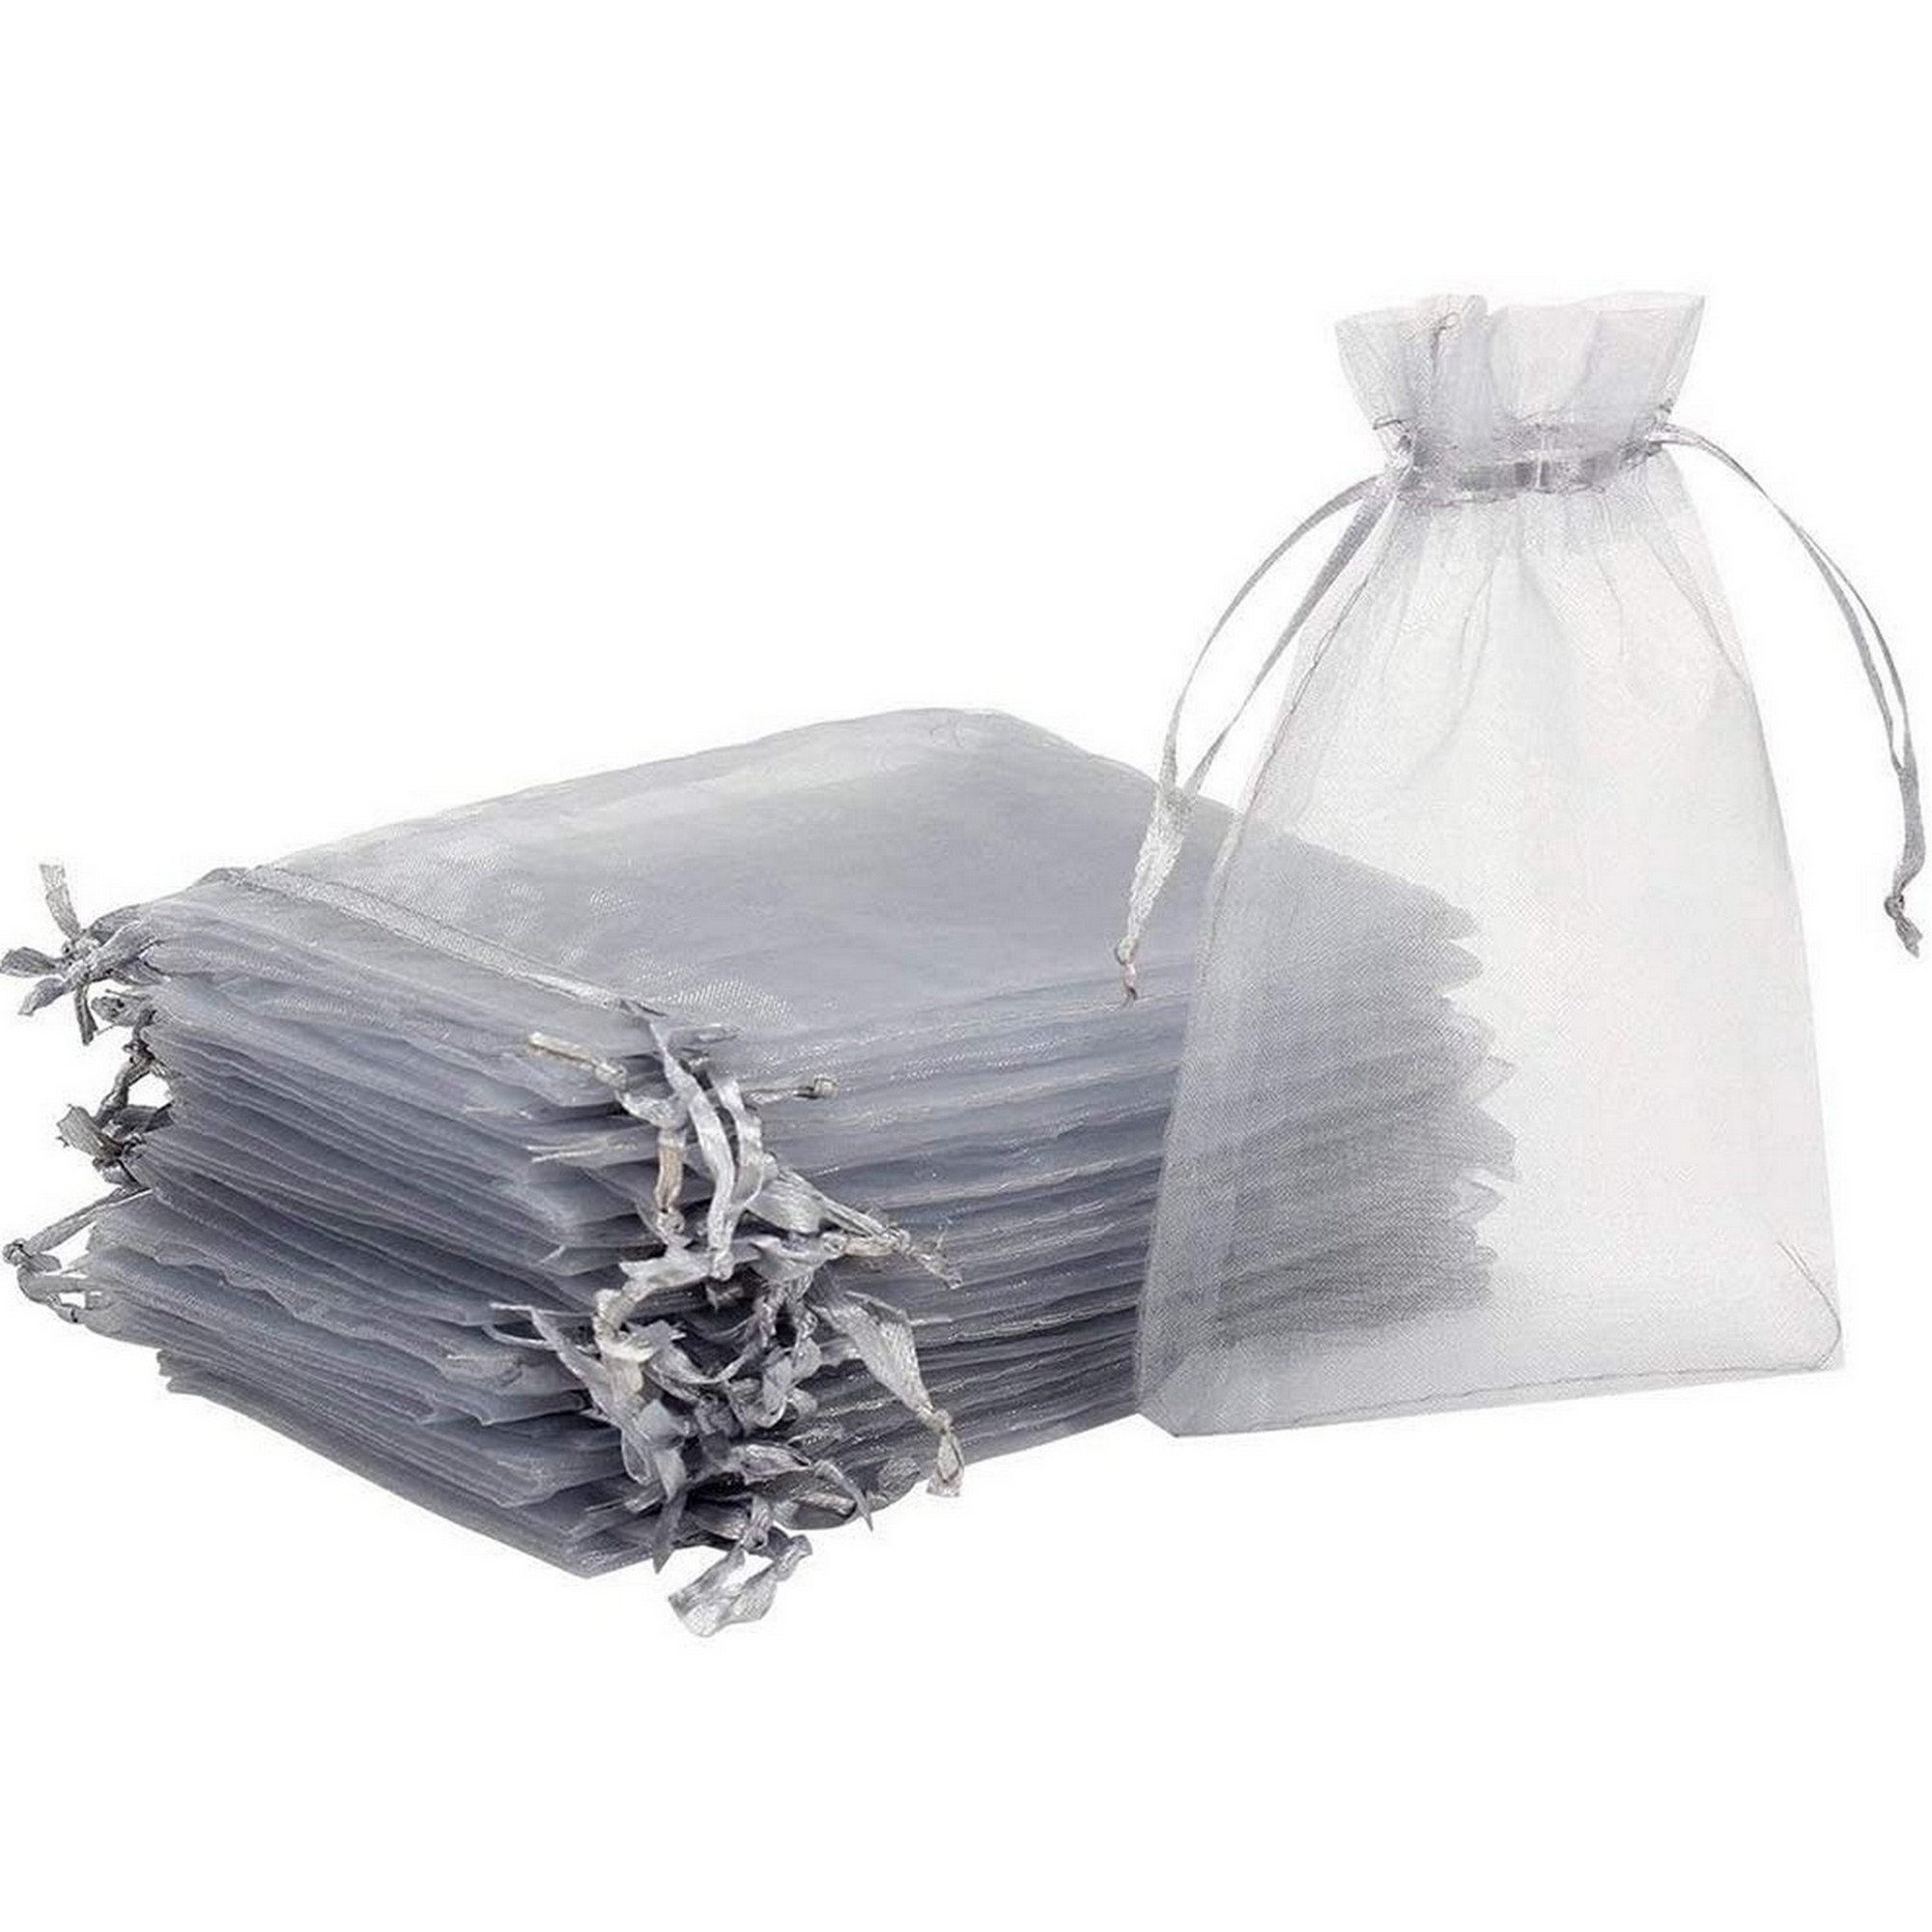 Arts & Crafts Gifts Party Decorations 100 Pack 5x7 Inch Mini Sheer Drawstring Organza Transparent Bags Jewelry Sack Pouches for Wedding White 